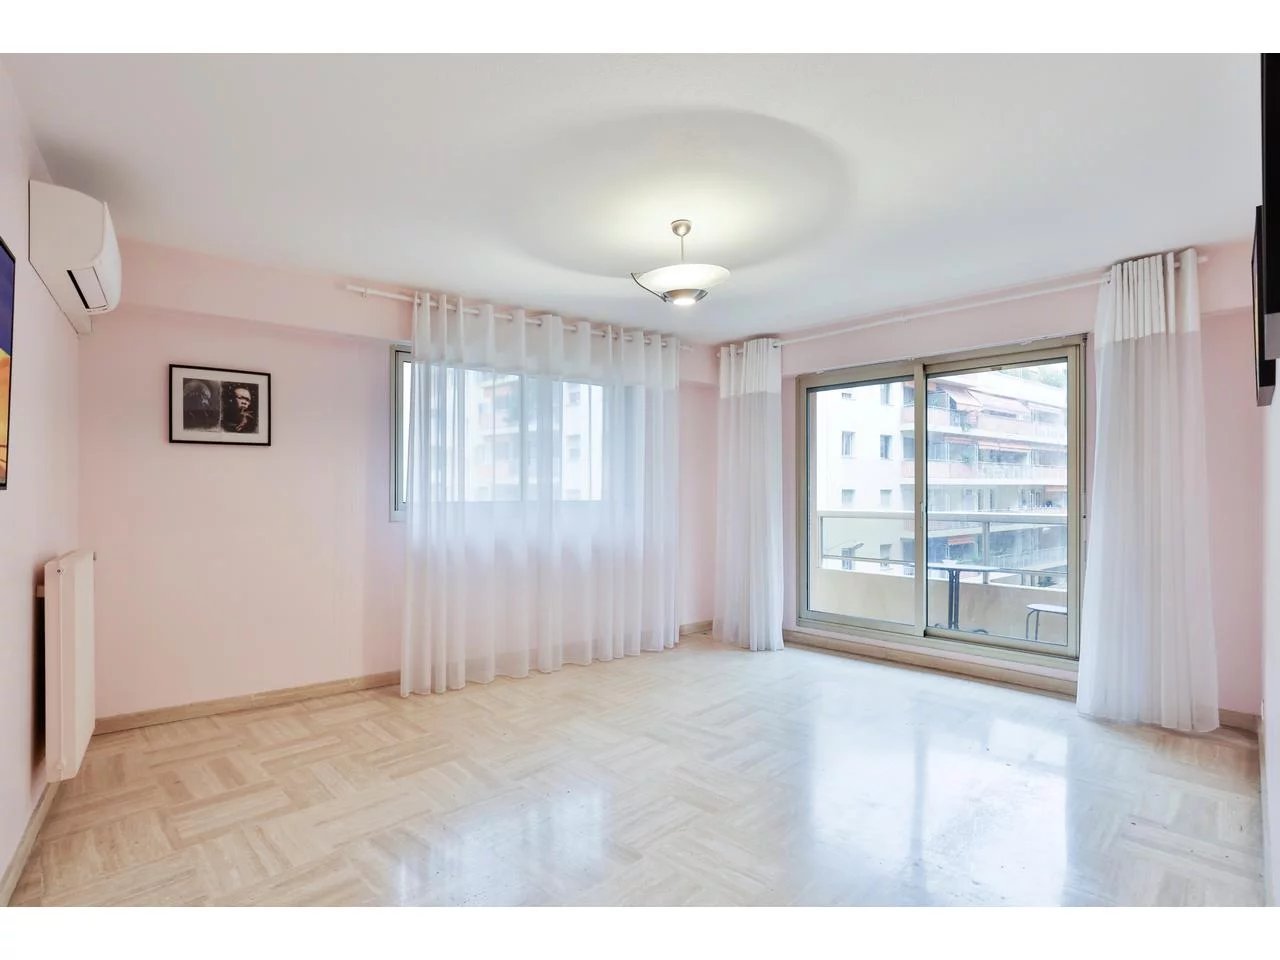 Appartement  3 Rooms 81.11m2  for sale   410 000 €